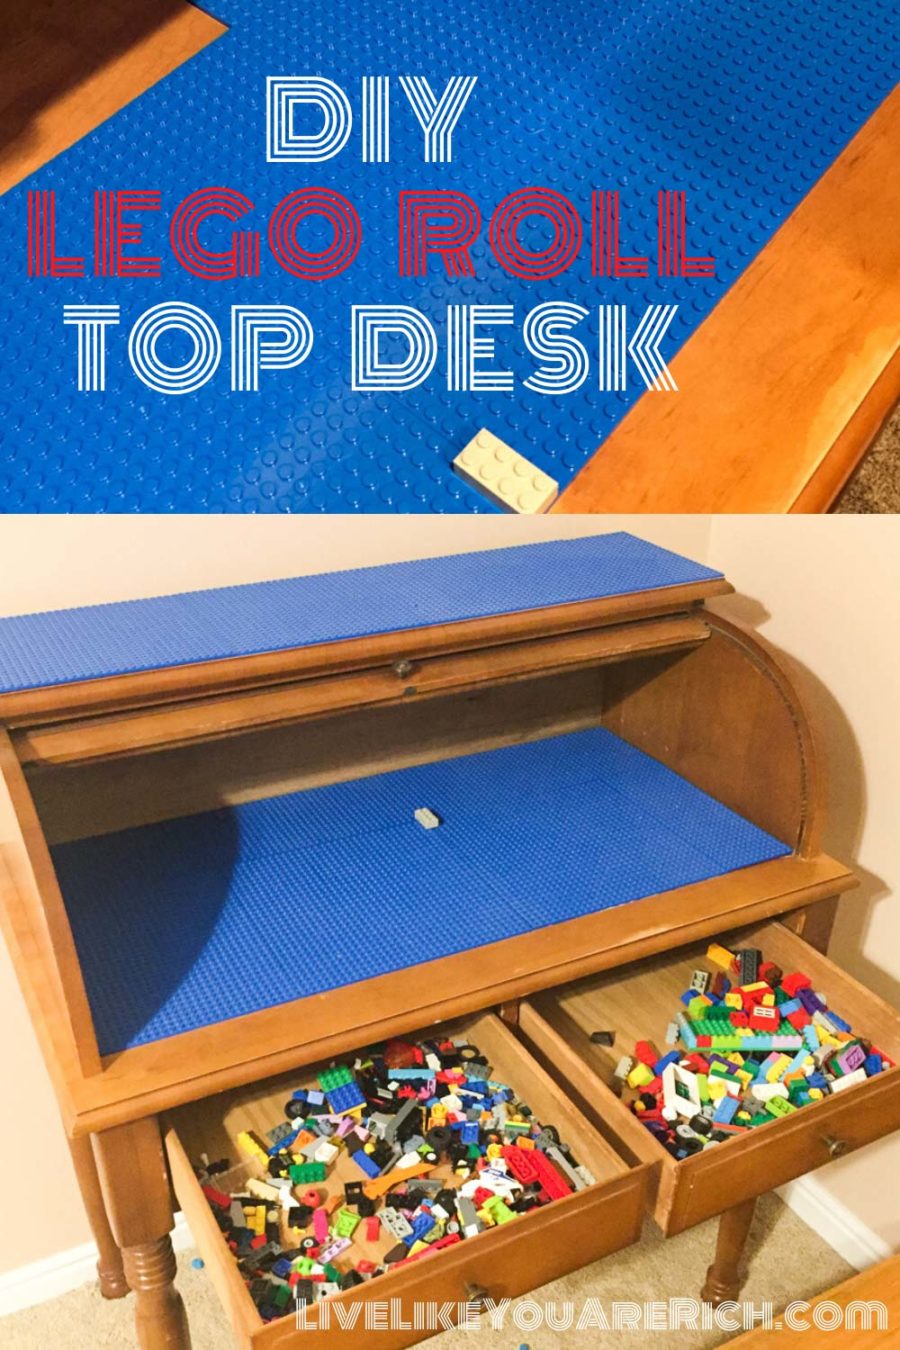 I wanted to make a DIY Lego Desk or table for my son’s legos. I got a roll-top desk for $20.00 on a local classified ad site. Together, with a friend, we built a customized DIY lego roll top desk. The kids have absolutely love it.  #diy #legodesk #diyproject #legostand 